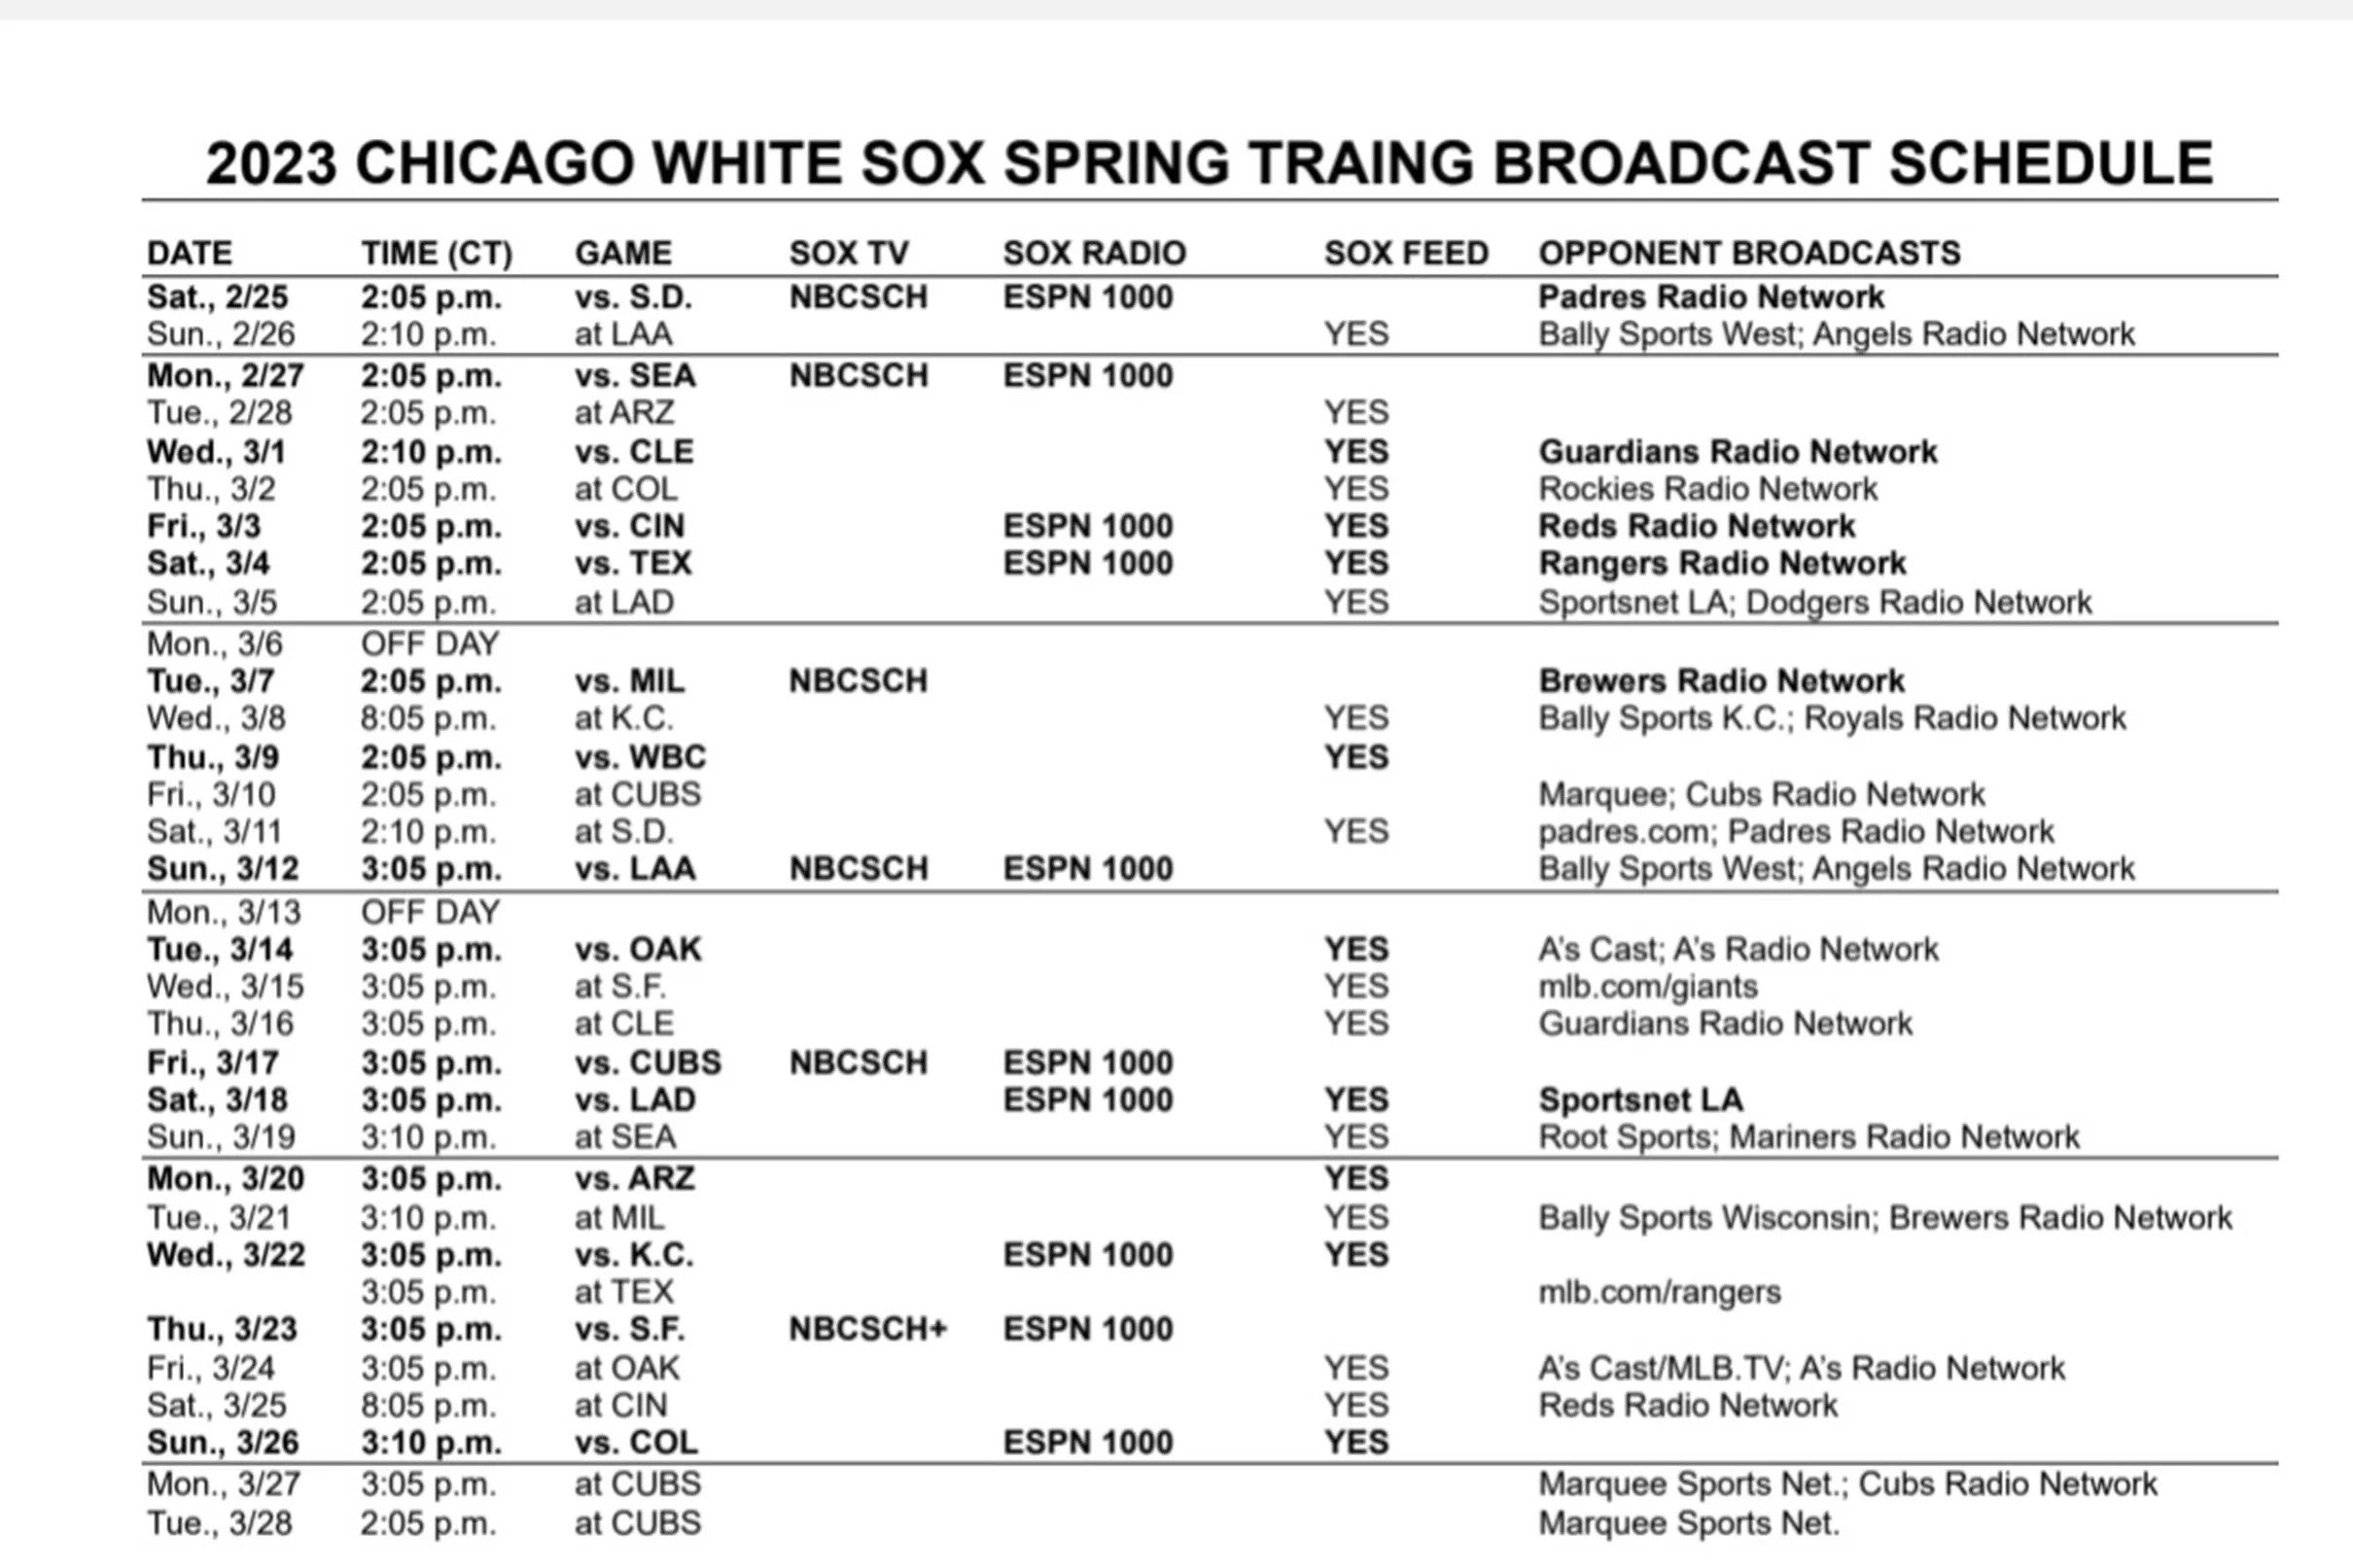 The 2023 White Sox Spring Training broadcast schedule